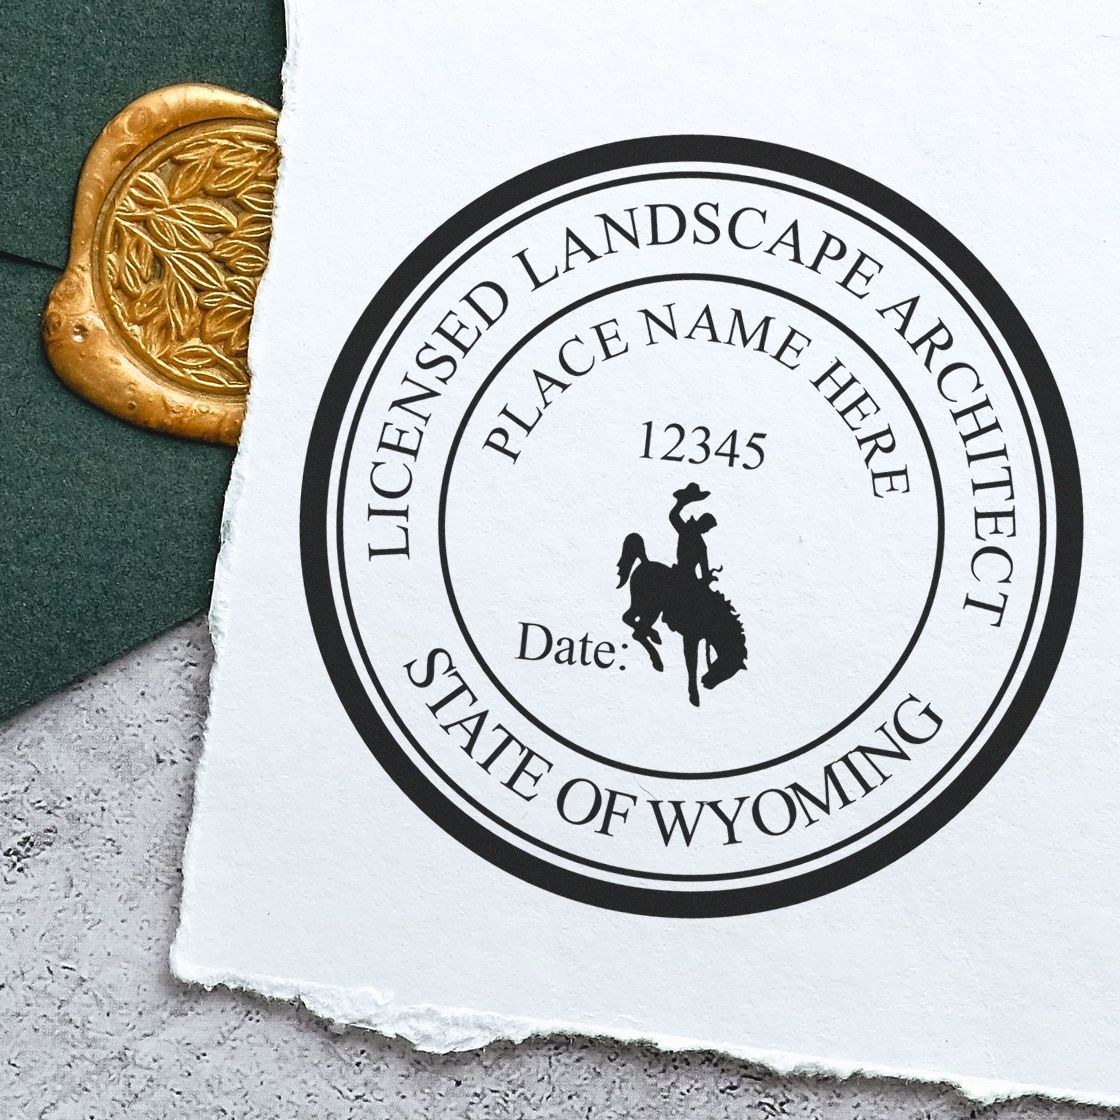 This paper is stamped with a sample imprint of the Slim Pre-Inked Wyoming Landscape Architect Seal Stamp, signifying its quality and reliability.